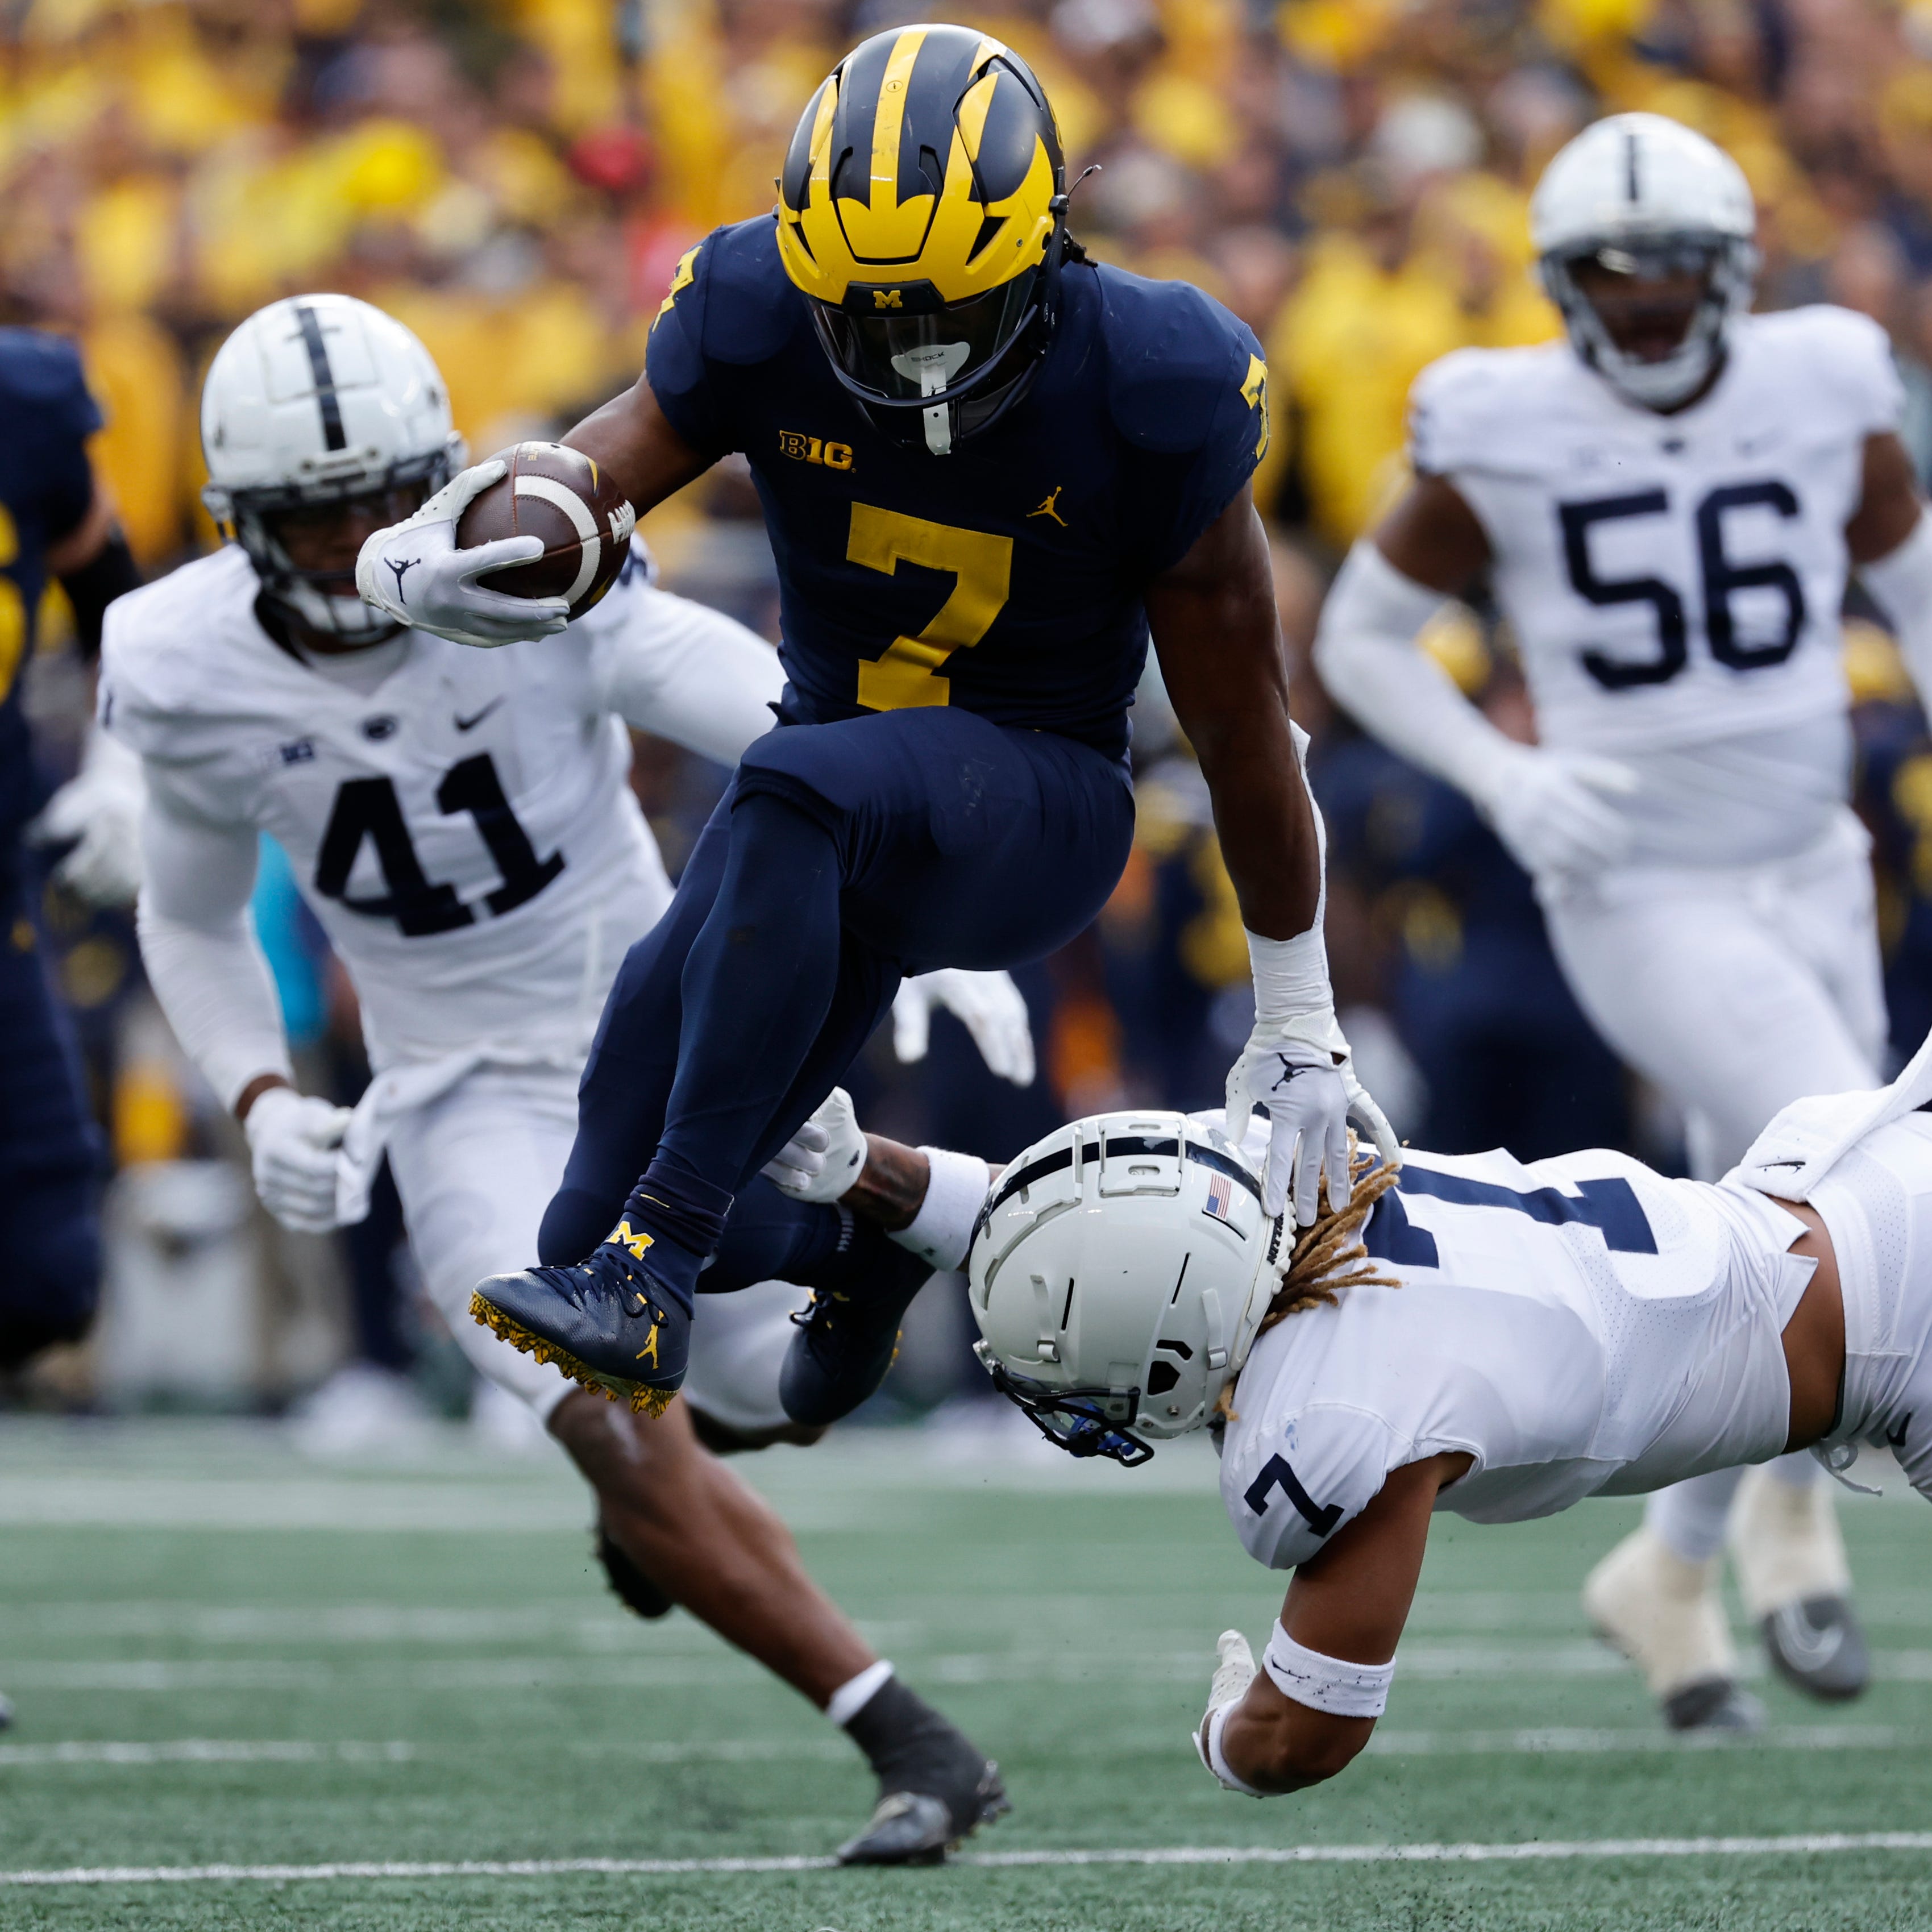 Michigan running back Donovan Edwards (7) avoids a Penn State defender while carrying the ball at Michigan Stadium.